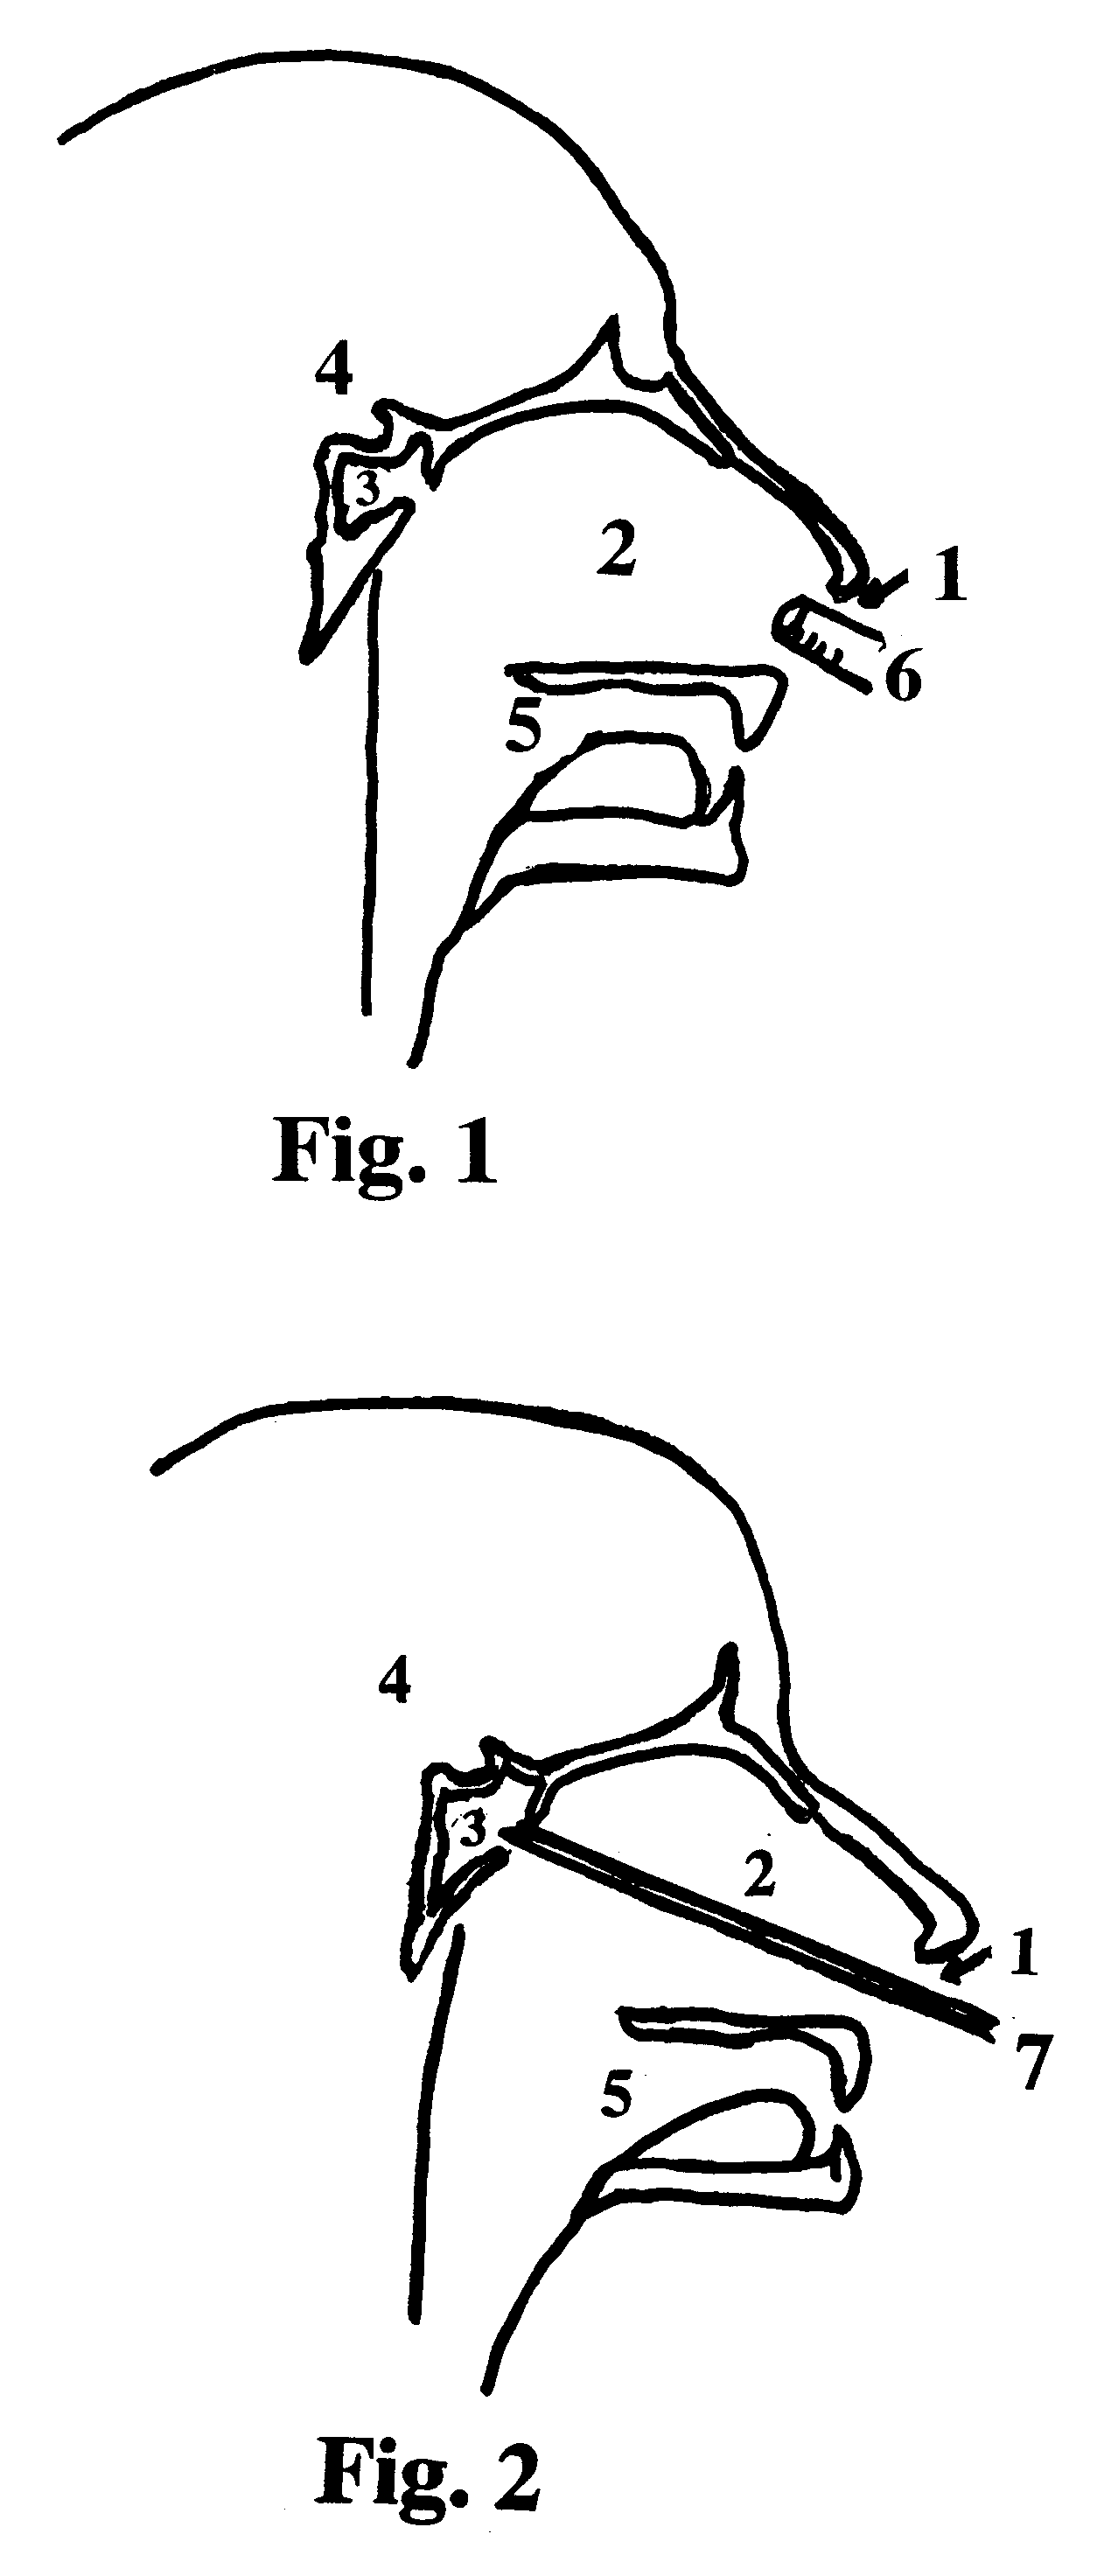 Method for inducing hypothermia for treating neurological disorders